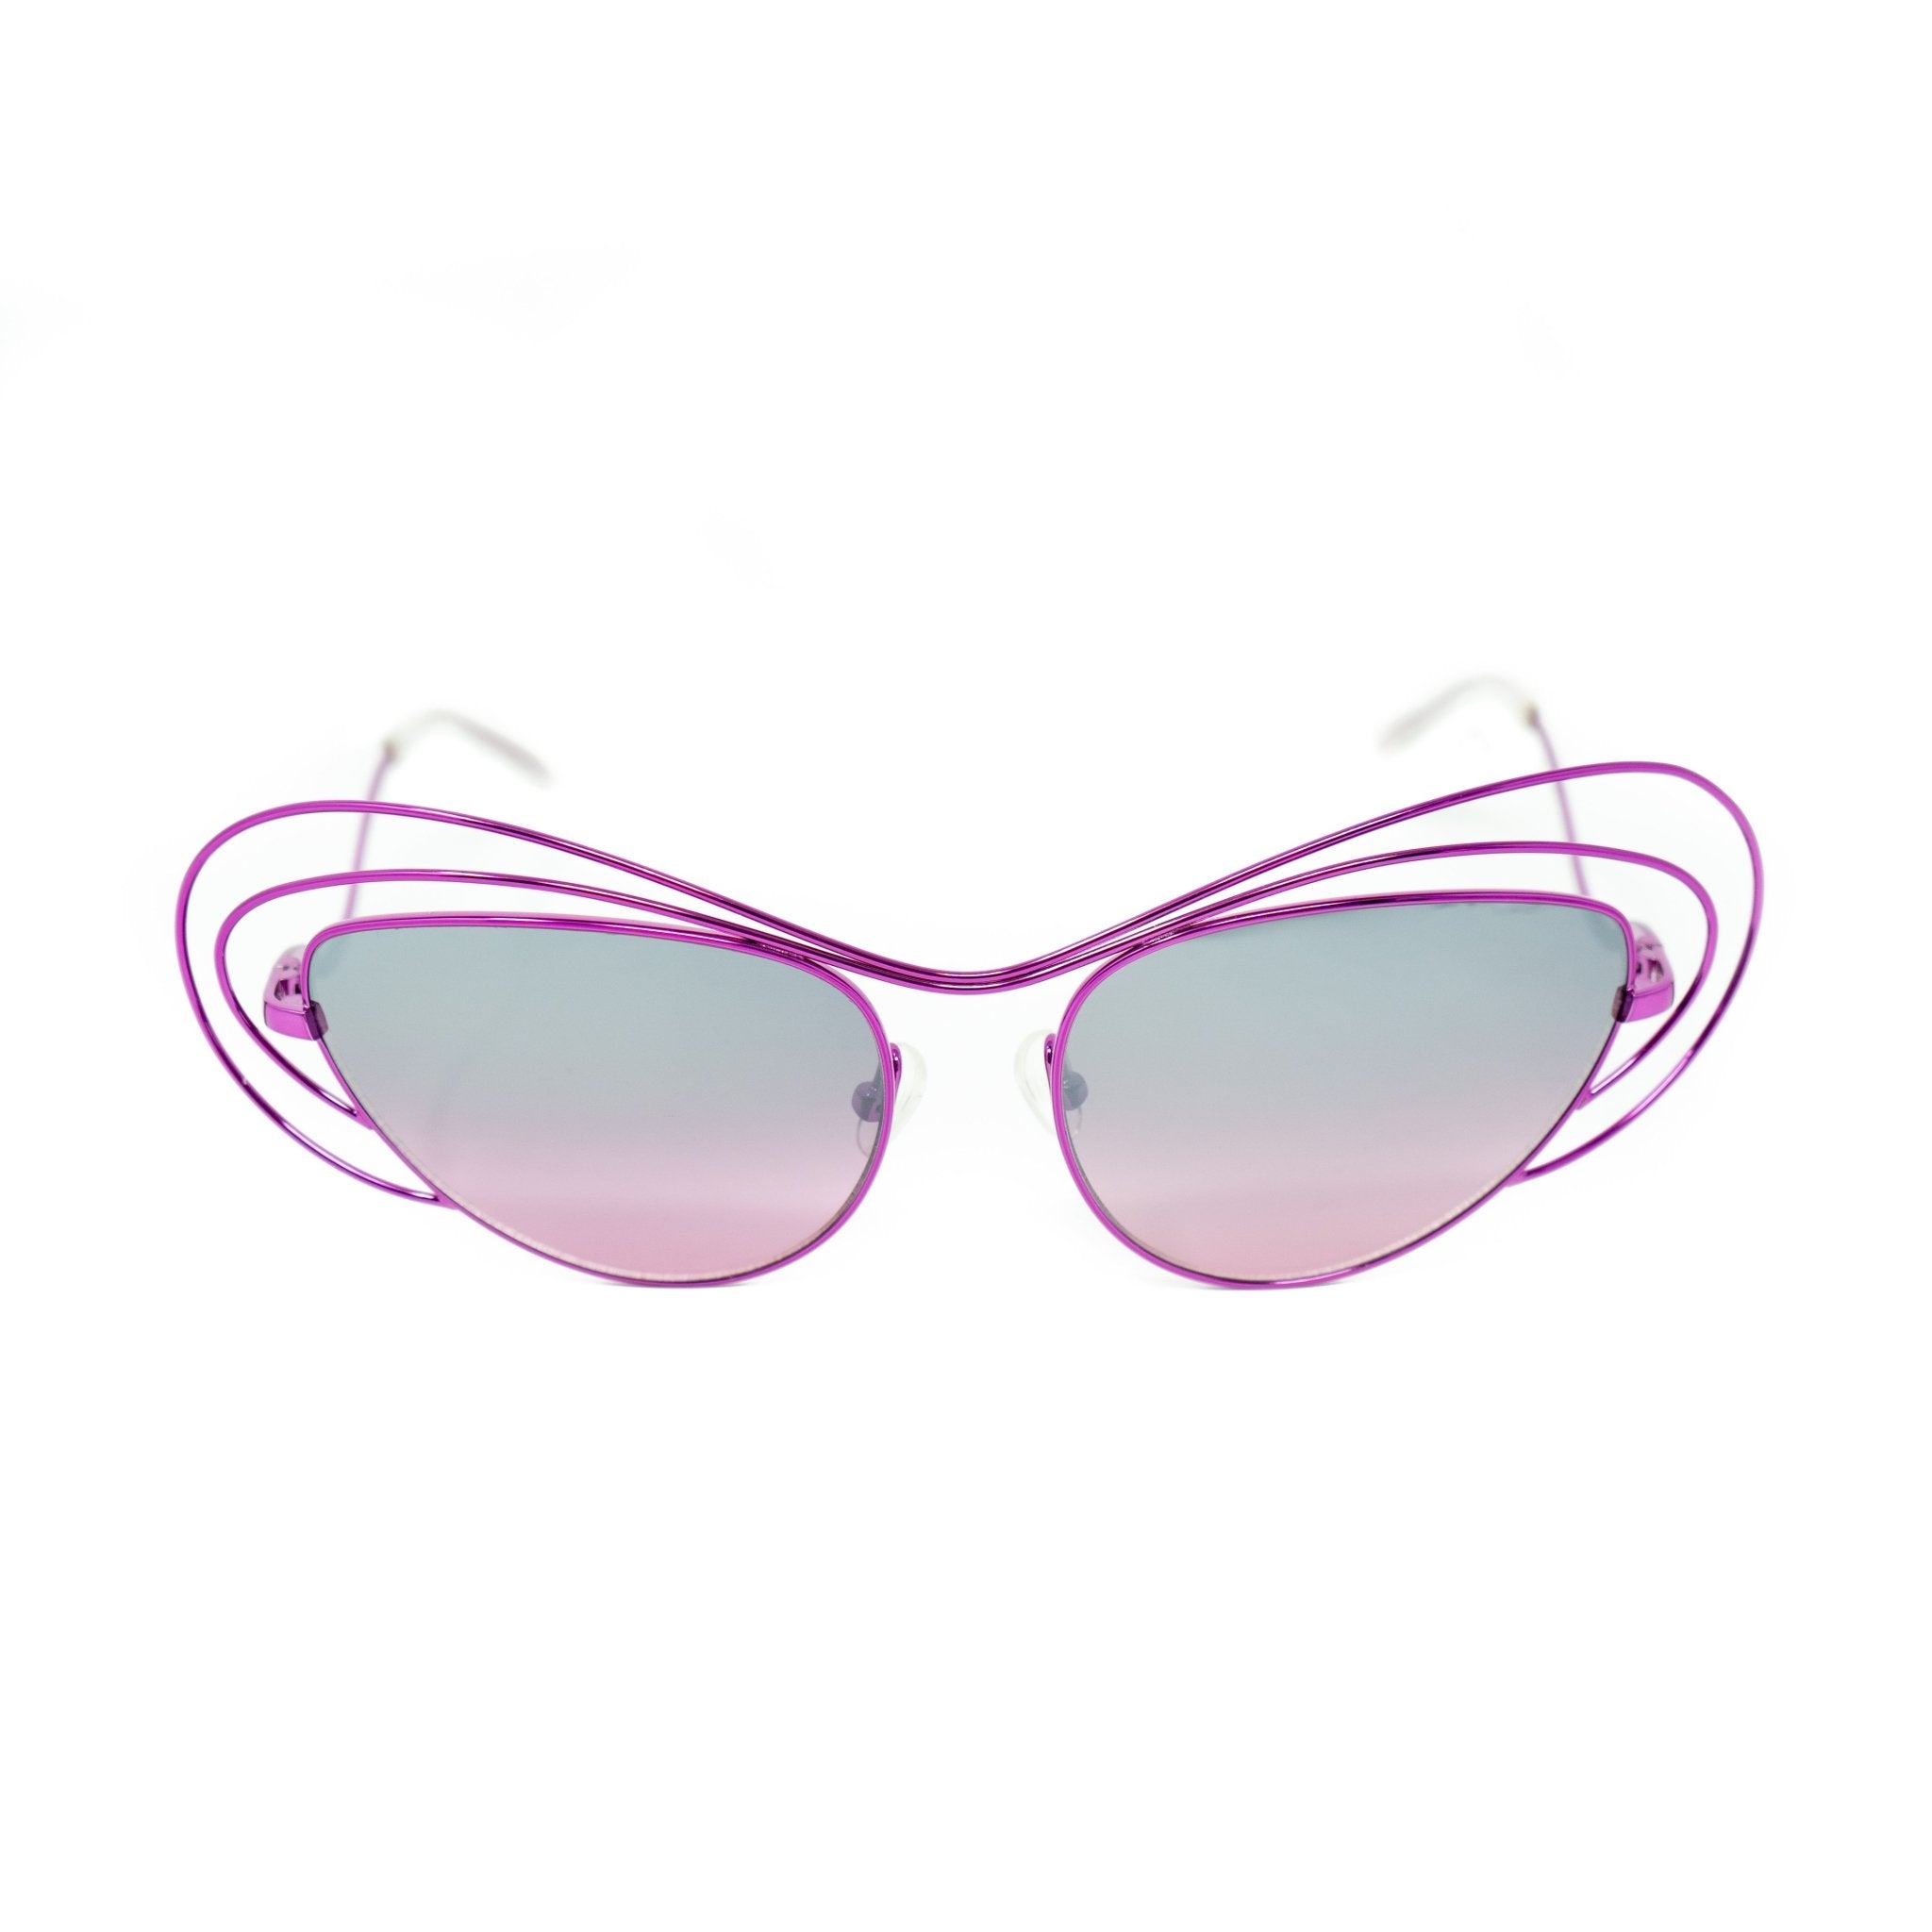 Erdem Women Sunglasses Special Frame Purple with Pink/Grey Graduated Mirrored Lenses Category 3 - EDM2C1SUN - Watches & Crystals